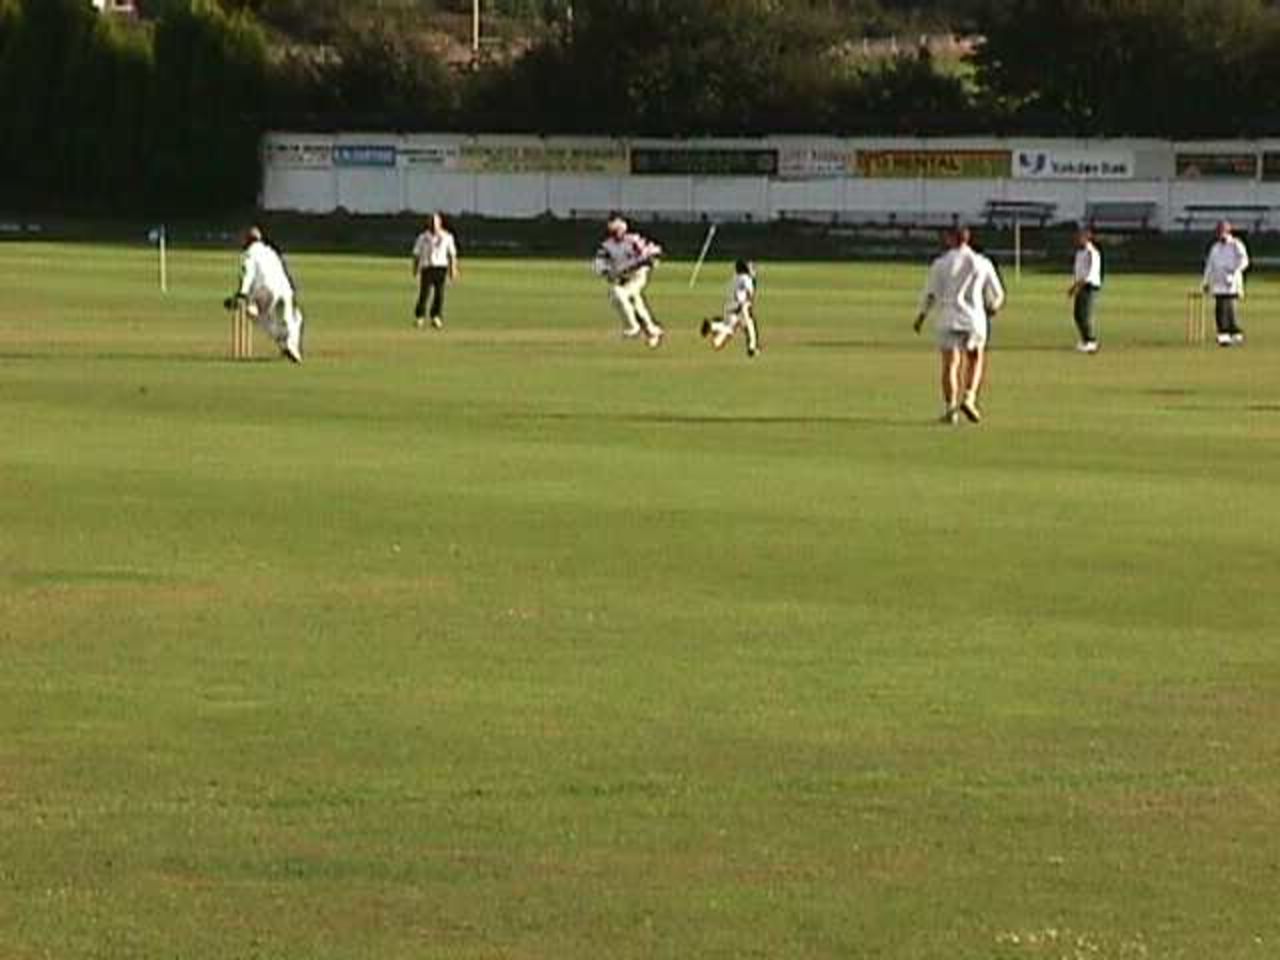 Simon Hanson gets off the mark with a single to third man